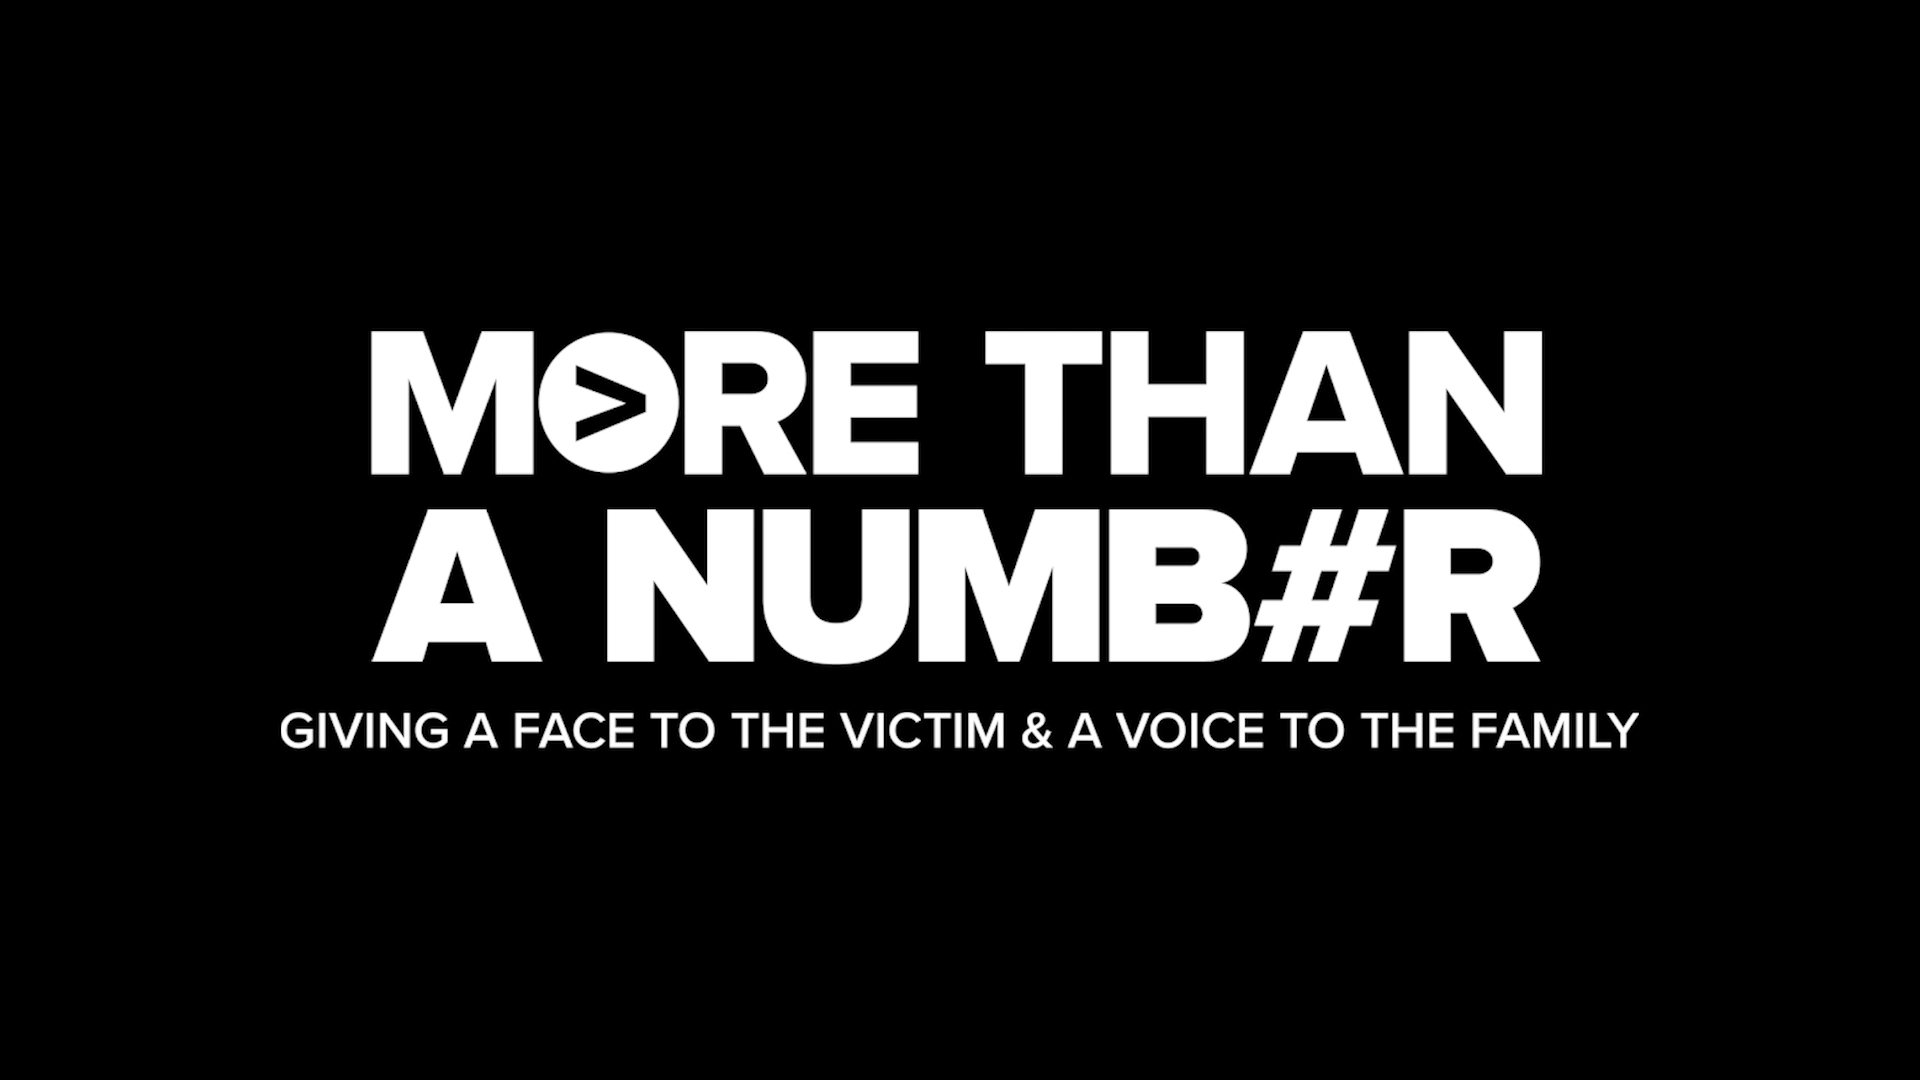 13 ON YOUR SIDE needs your help giving a face to the victim and a voice to the family.